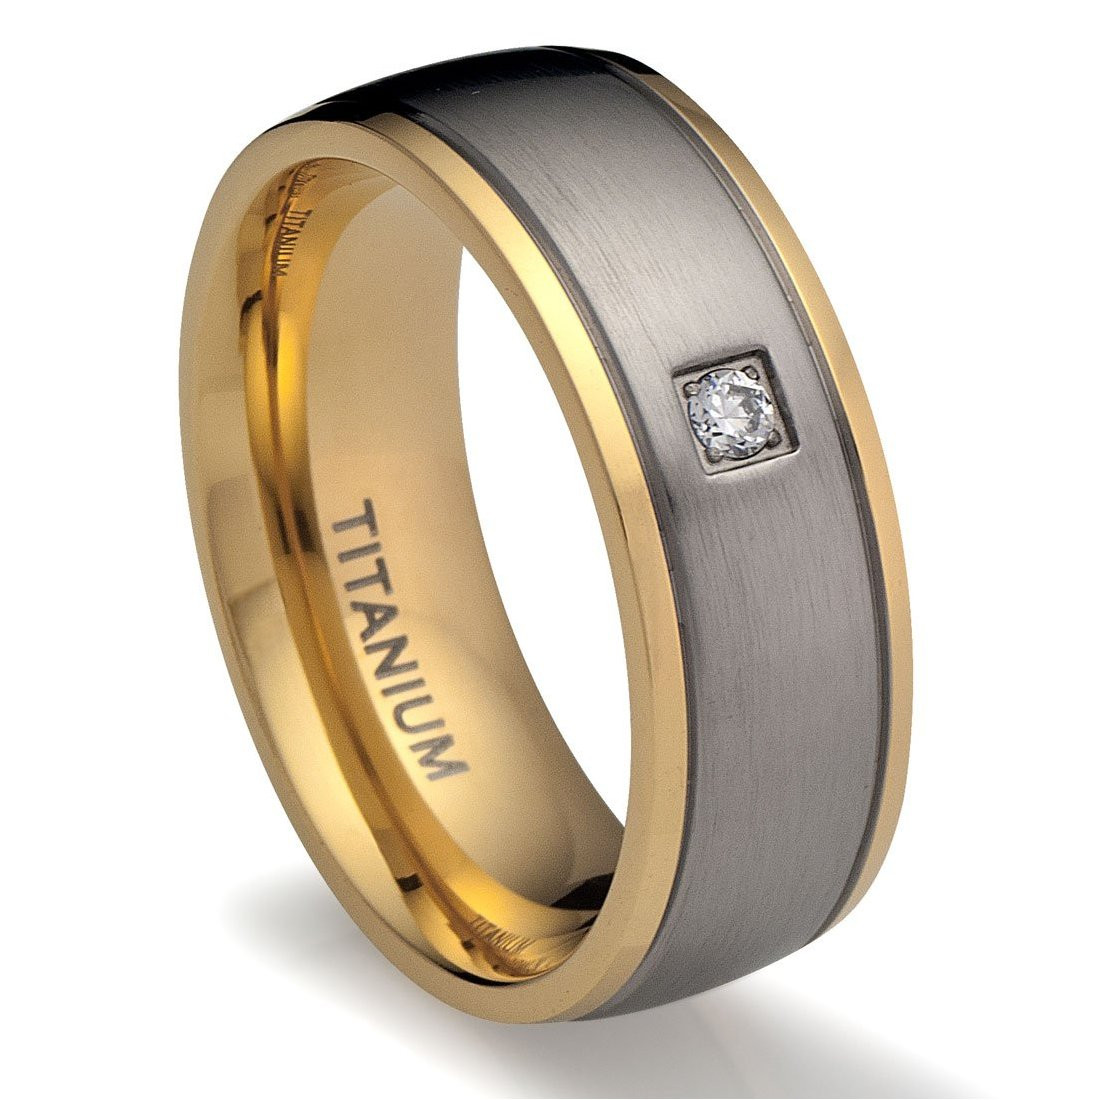 Wedding Bands For Men
 Keep these Points in Mind When Picking Men’s Wedding Bands